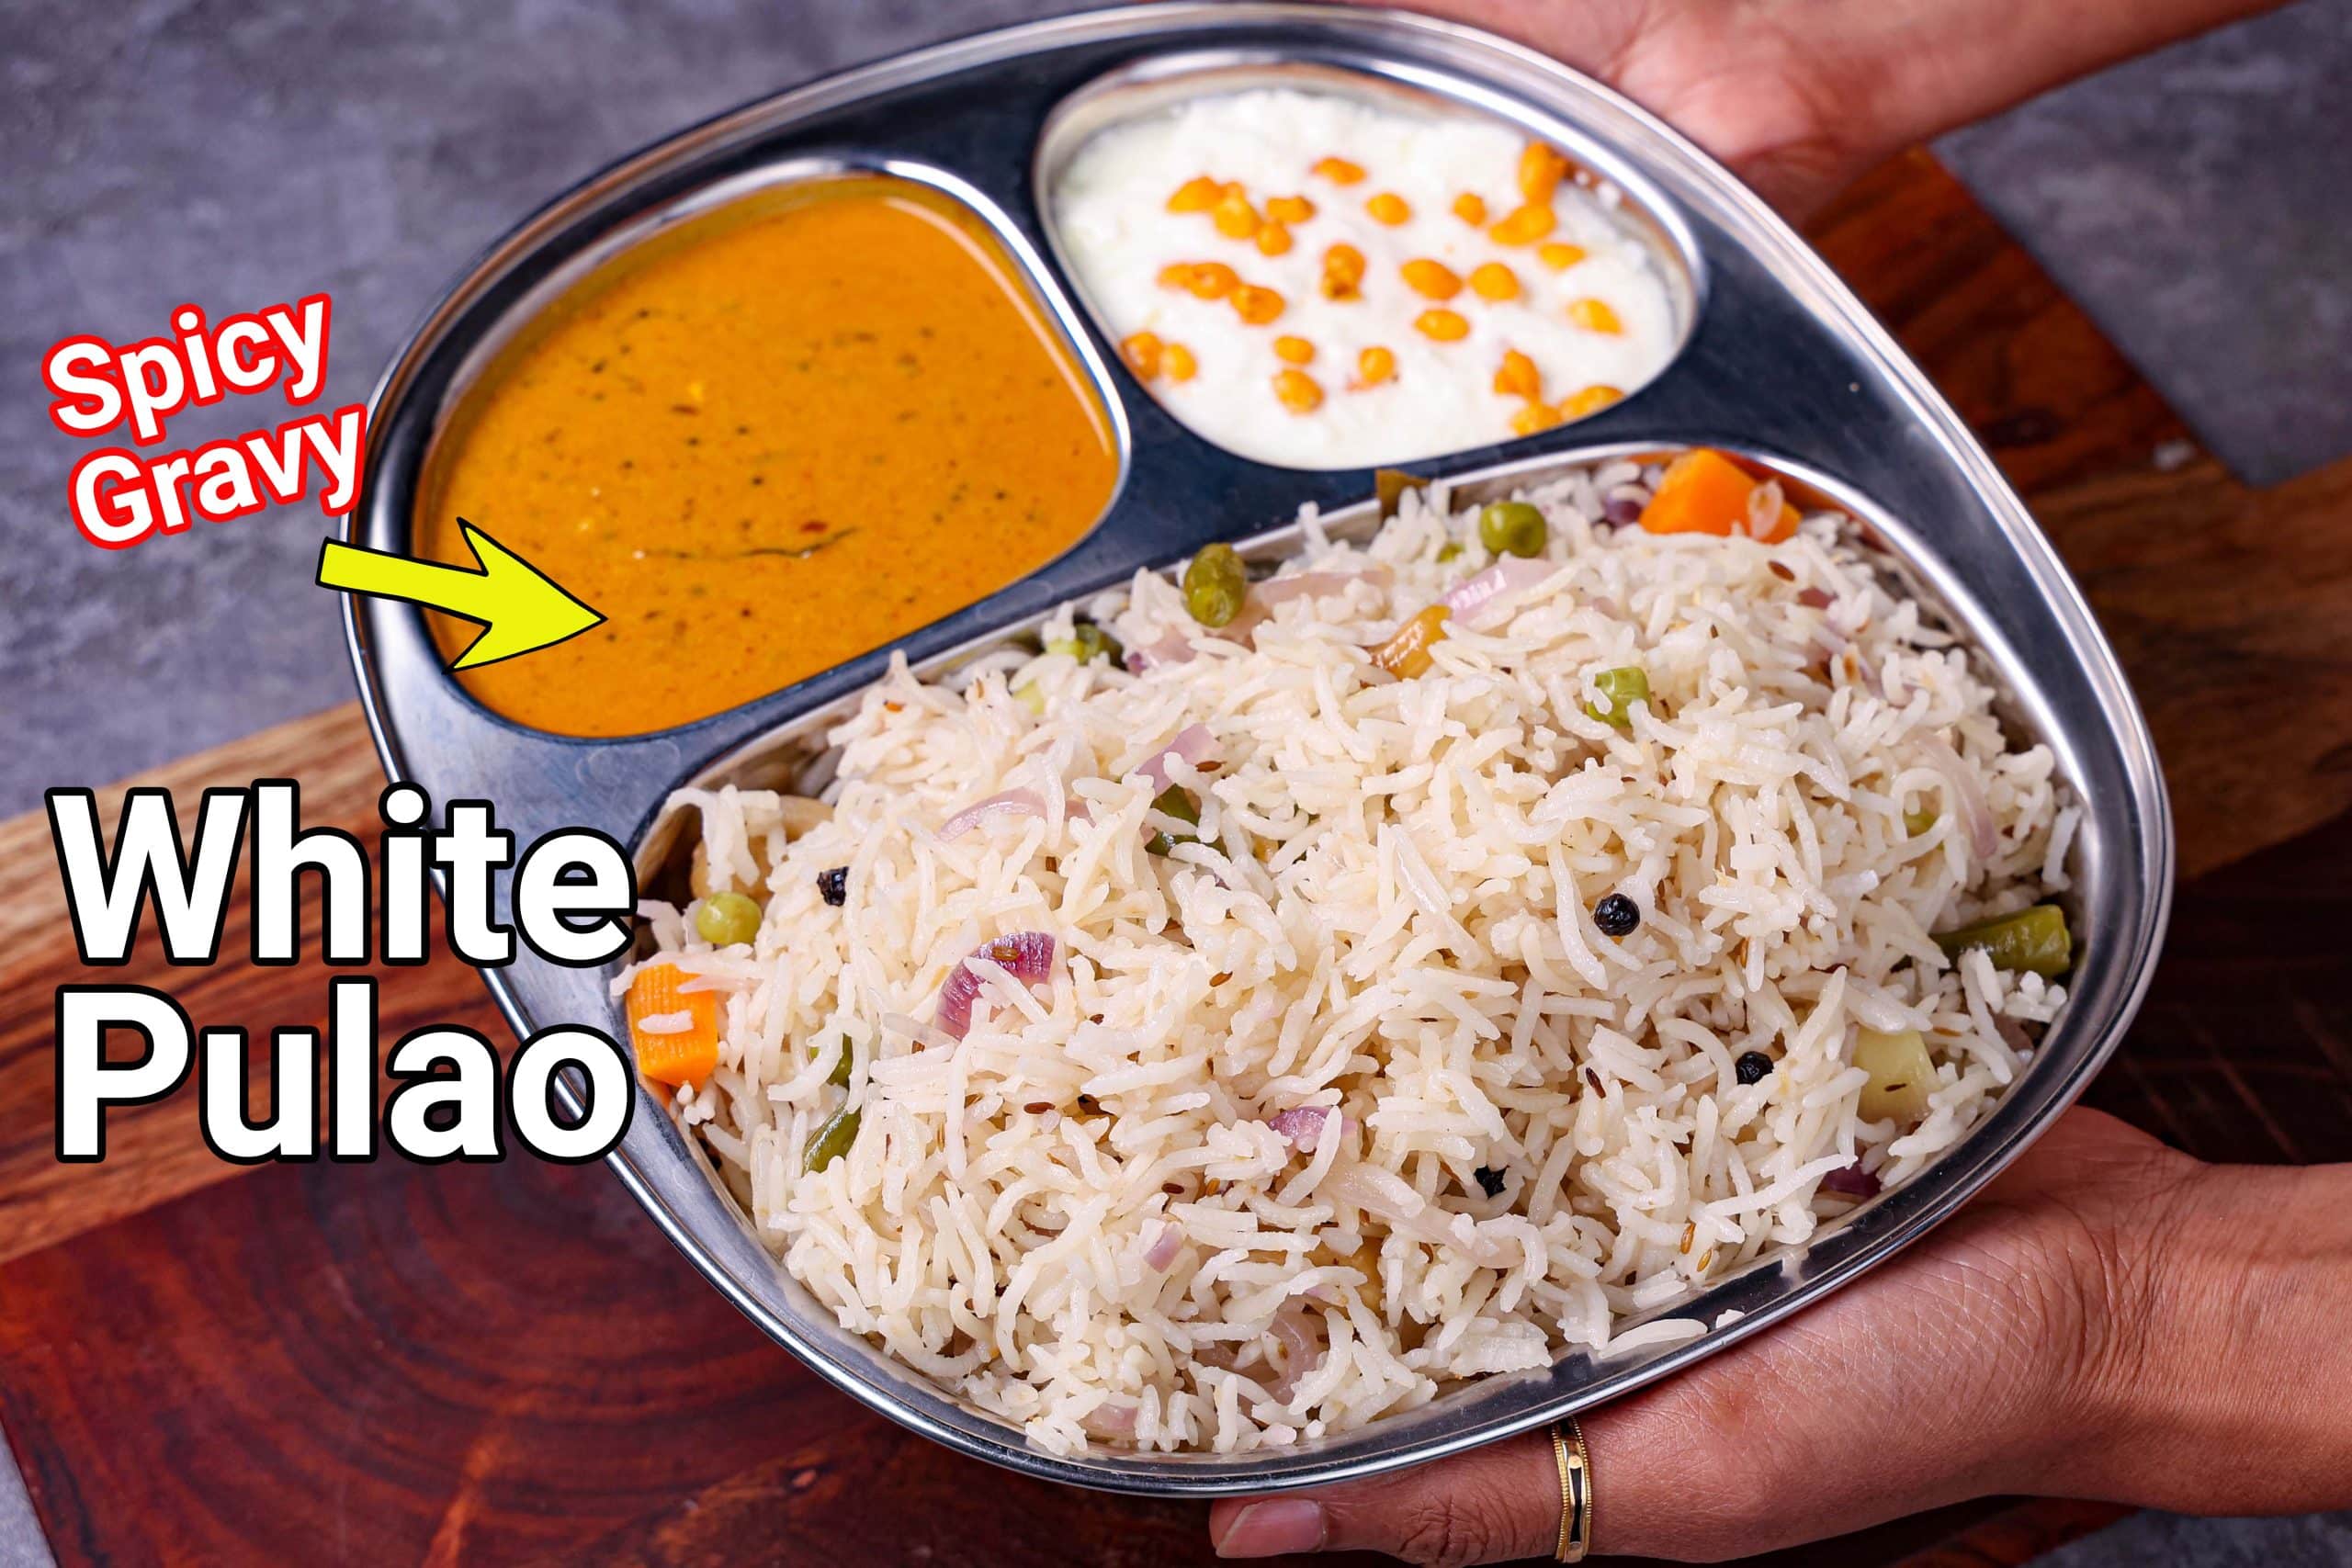 White Pulao Recipe & Simple Spicy Curry